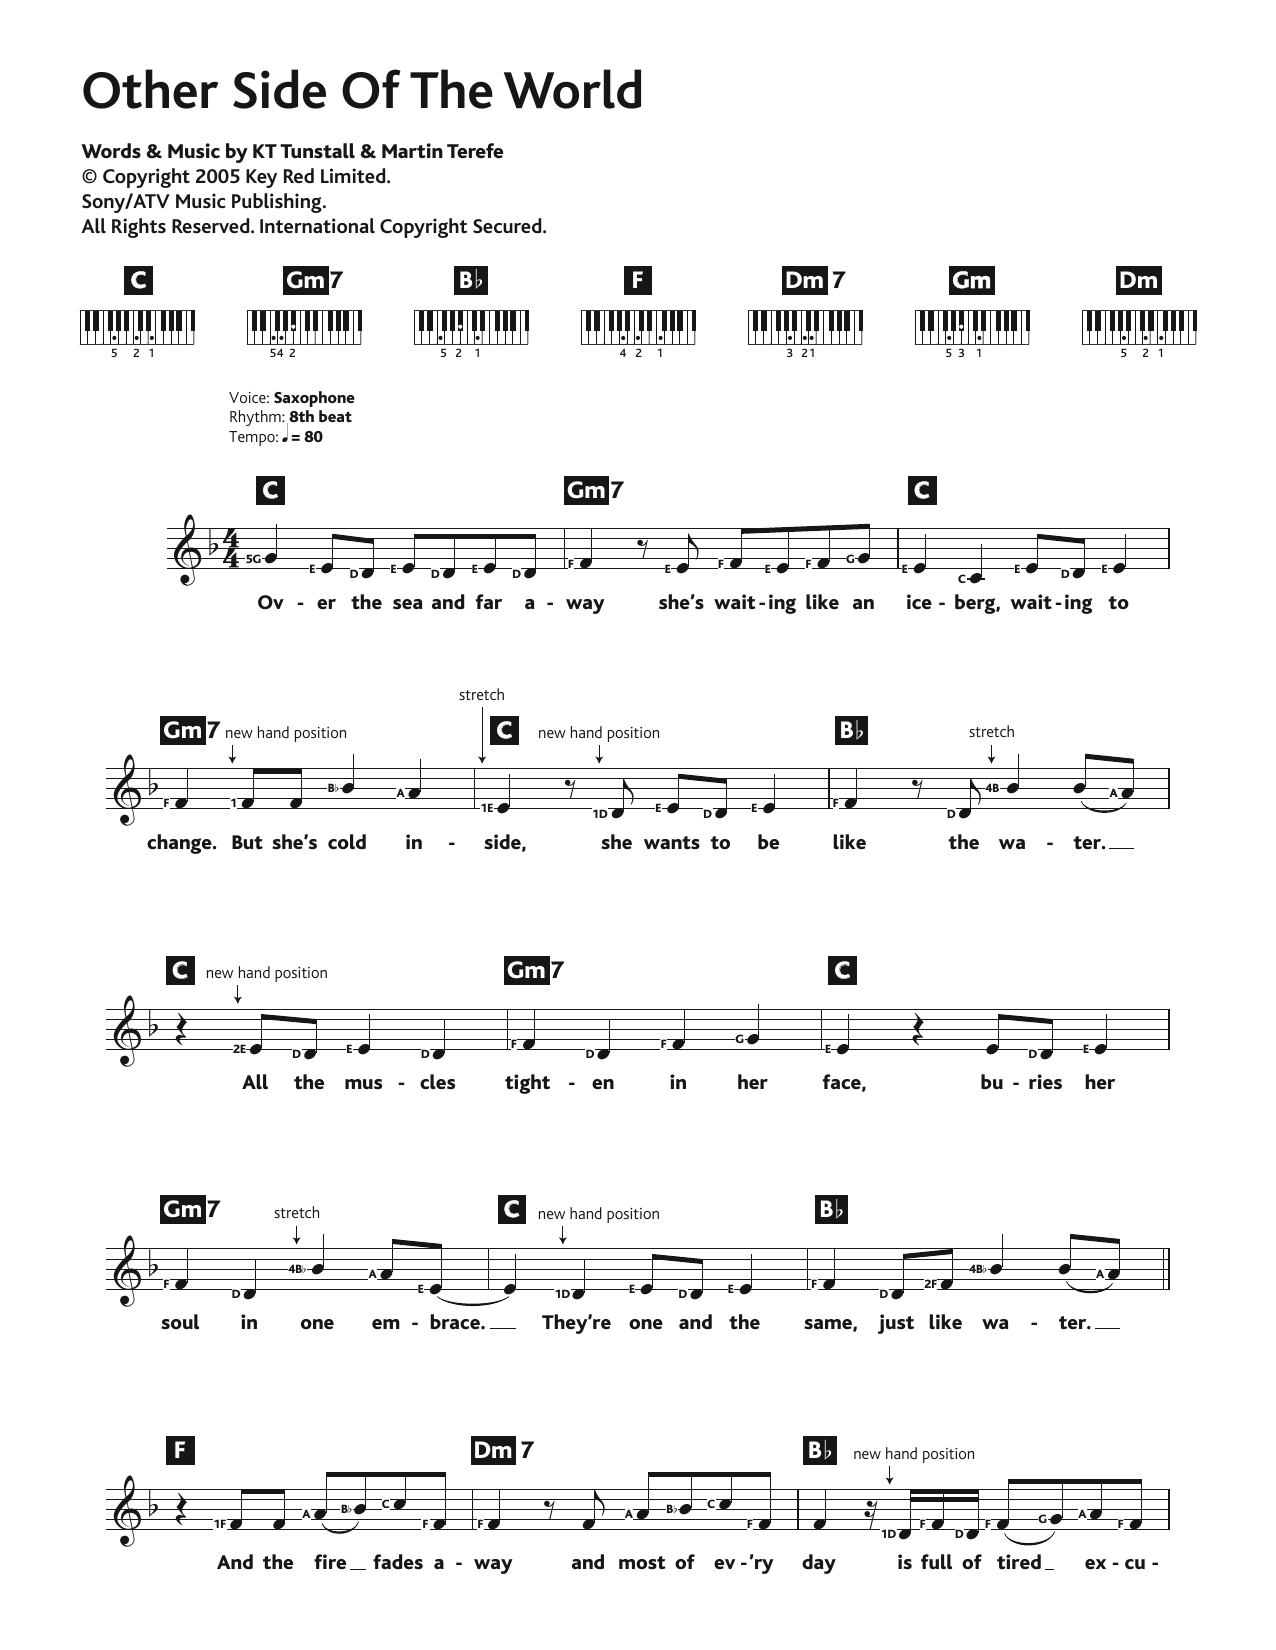 Download KT Tunstall Other Side Of The World Sheet Music